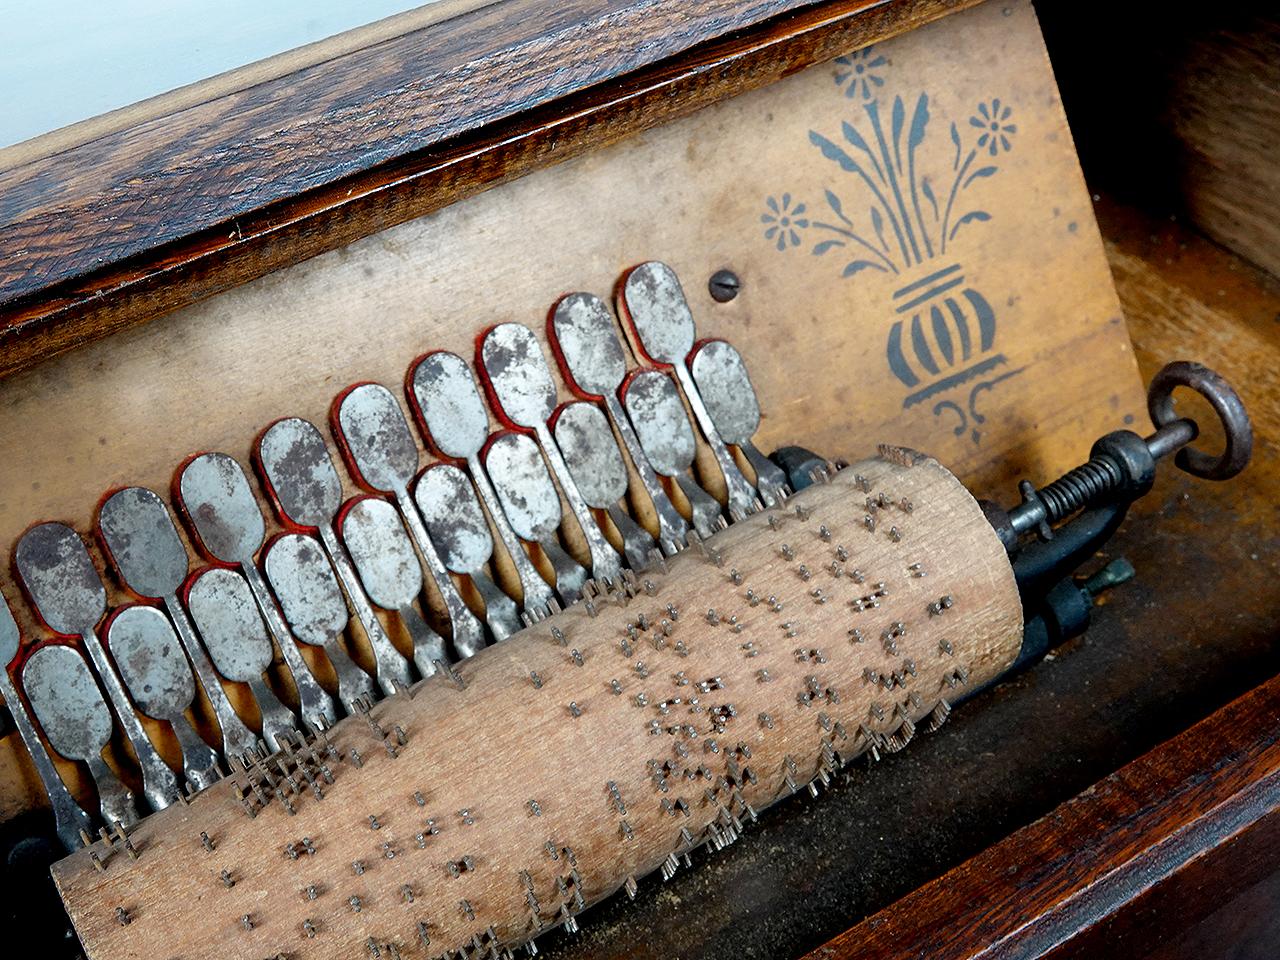 This roller organ was most likely made by the Autophone Company in Ithaca, New York, around 1885-1899. It is a Concert 20-note model, with 20 reeds and a hinged glass front cover. This roller organ plays a metal-pin-studded wooden cylinder also